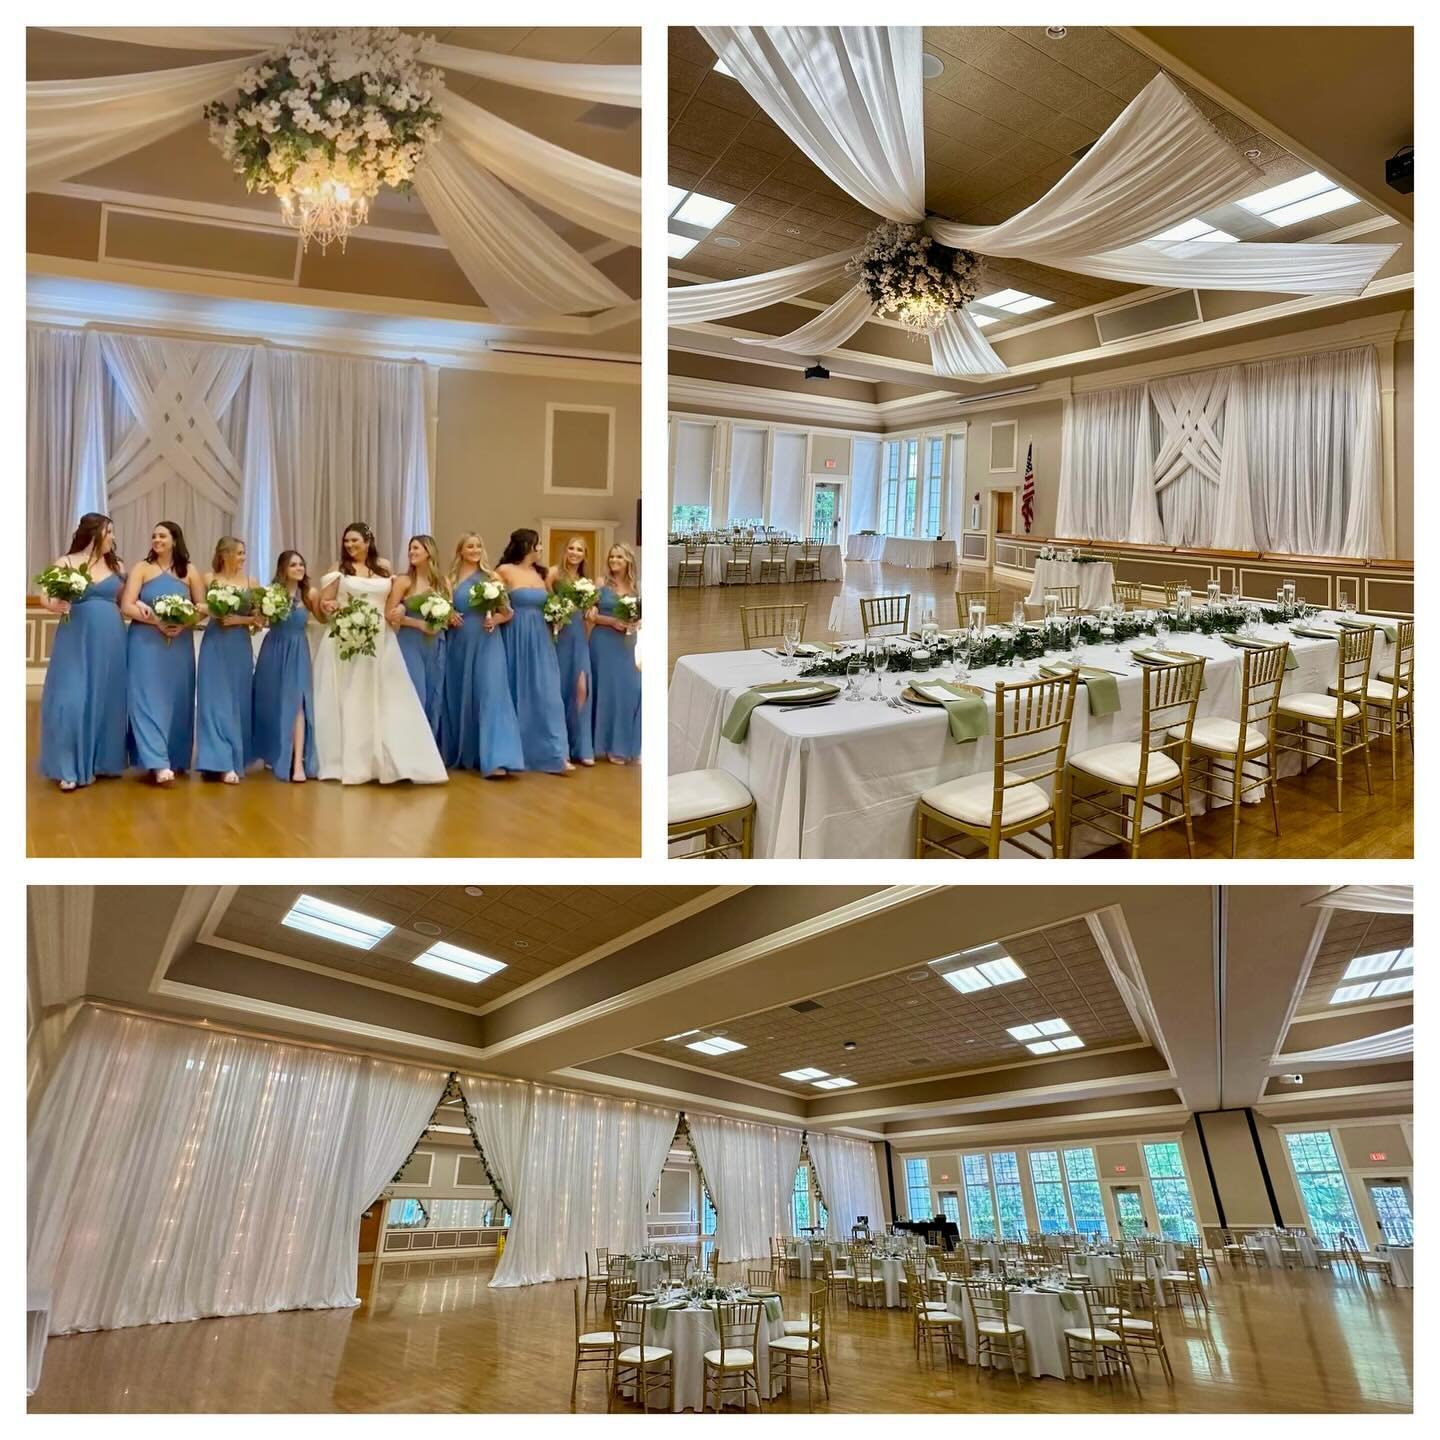 Picture perfect wedding at Higgins Hall. We provided the Draped Ceiling Starburst, Draped Room Divider with String Lights + Faux Vines, Draped Stage/Backdrop, &amp; Gold Chiavari Chairs. Pleasure working with Beyond Floral &amp; Arlene&rsquo;s Floral